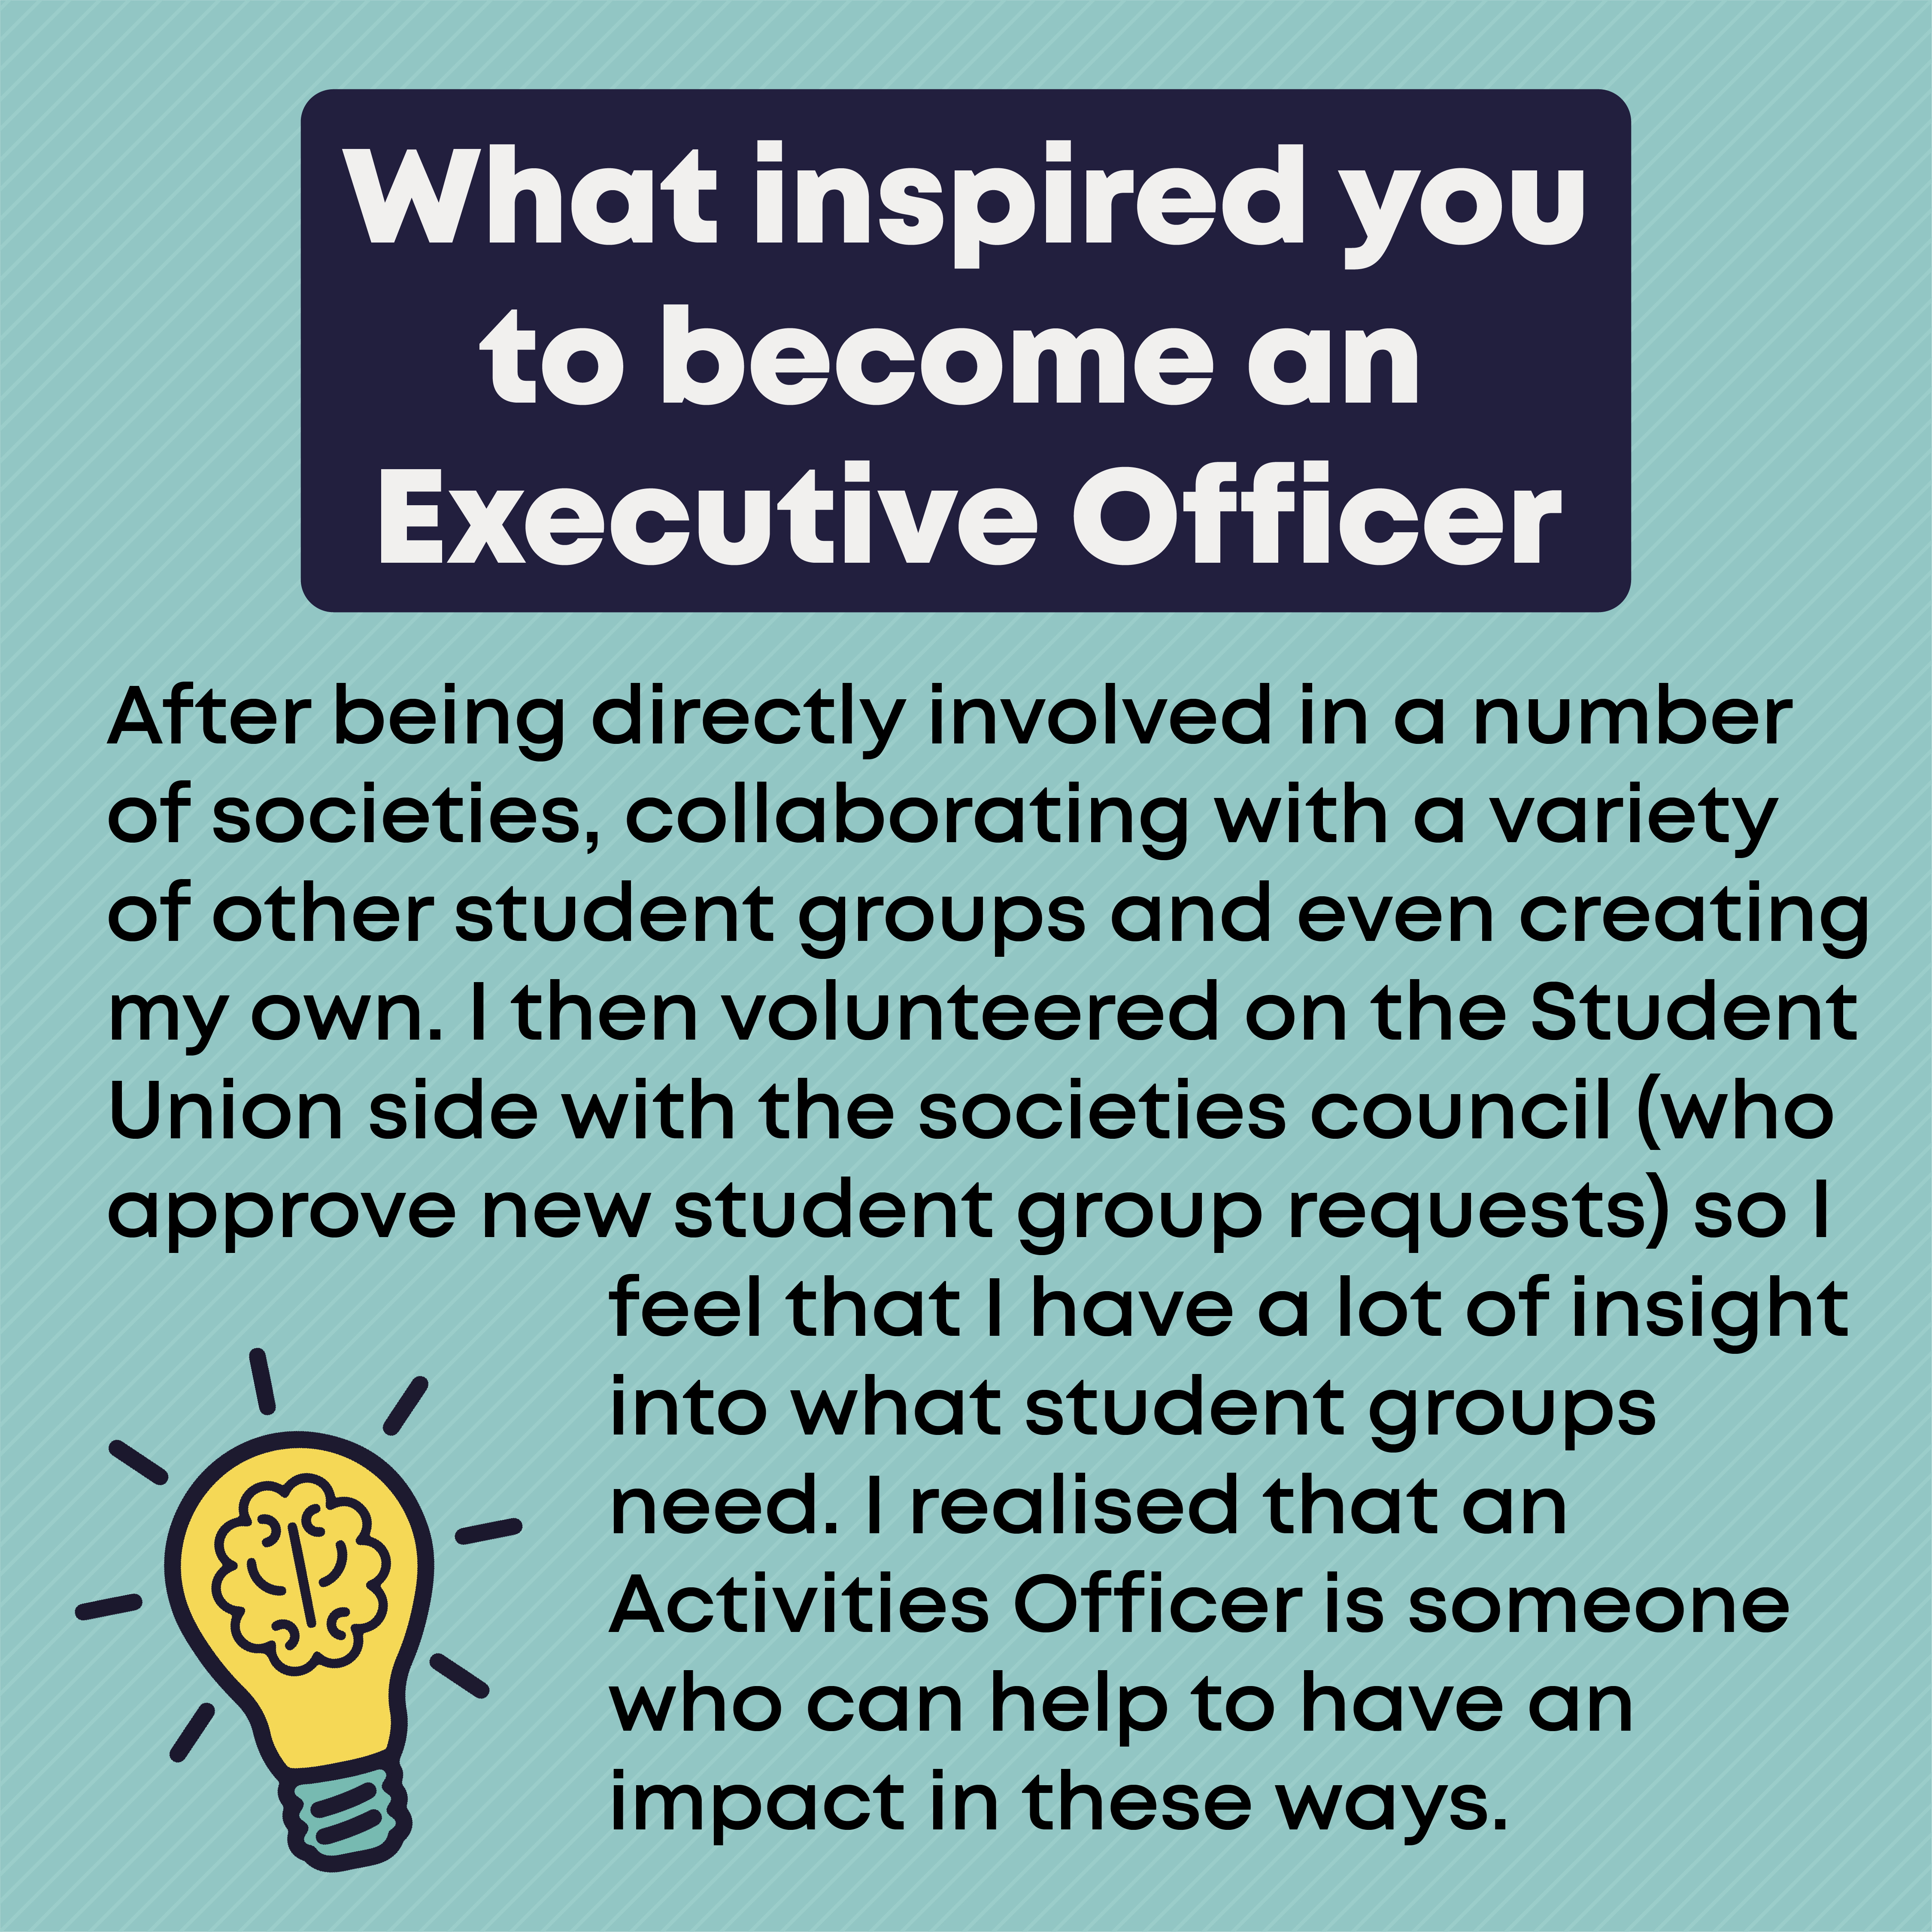 What inspired you to become an Exec Officer?        After being directly involved in a number of societies, collaborating with a variety of other student groups and even creating my own. I then volunteered on the Student Union side with the societies council (who approve new student group requests) so I feel that I have a lot of insight into what student groups need. I realised that an Activities Officer is someone who can help to have an impact in these ways.